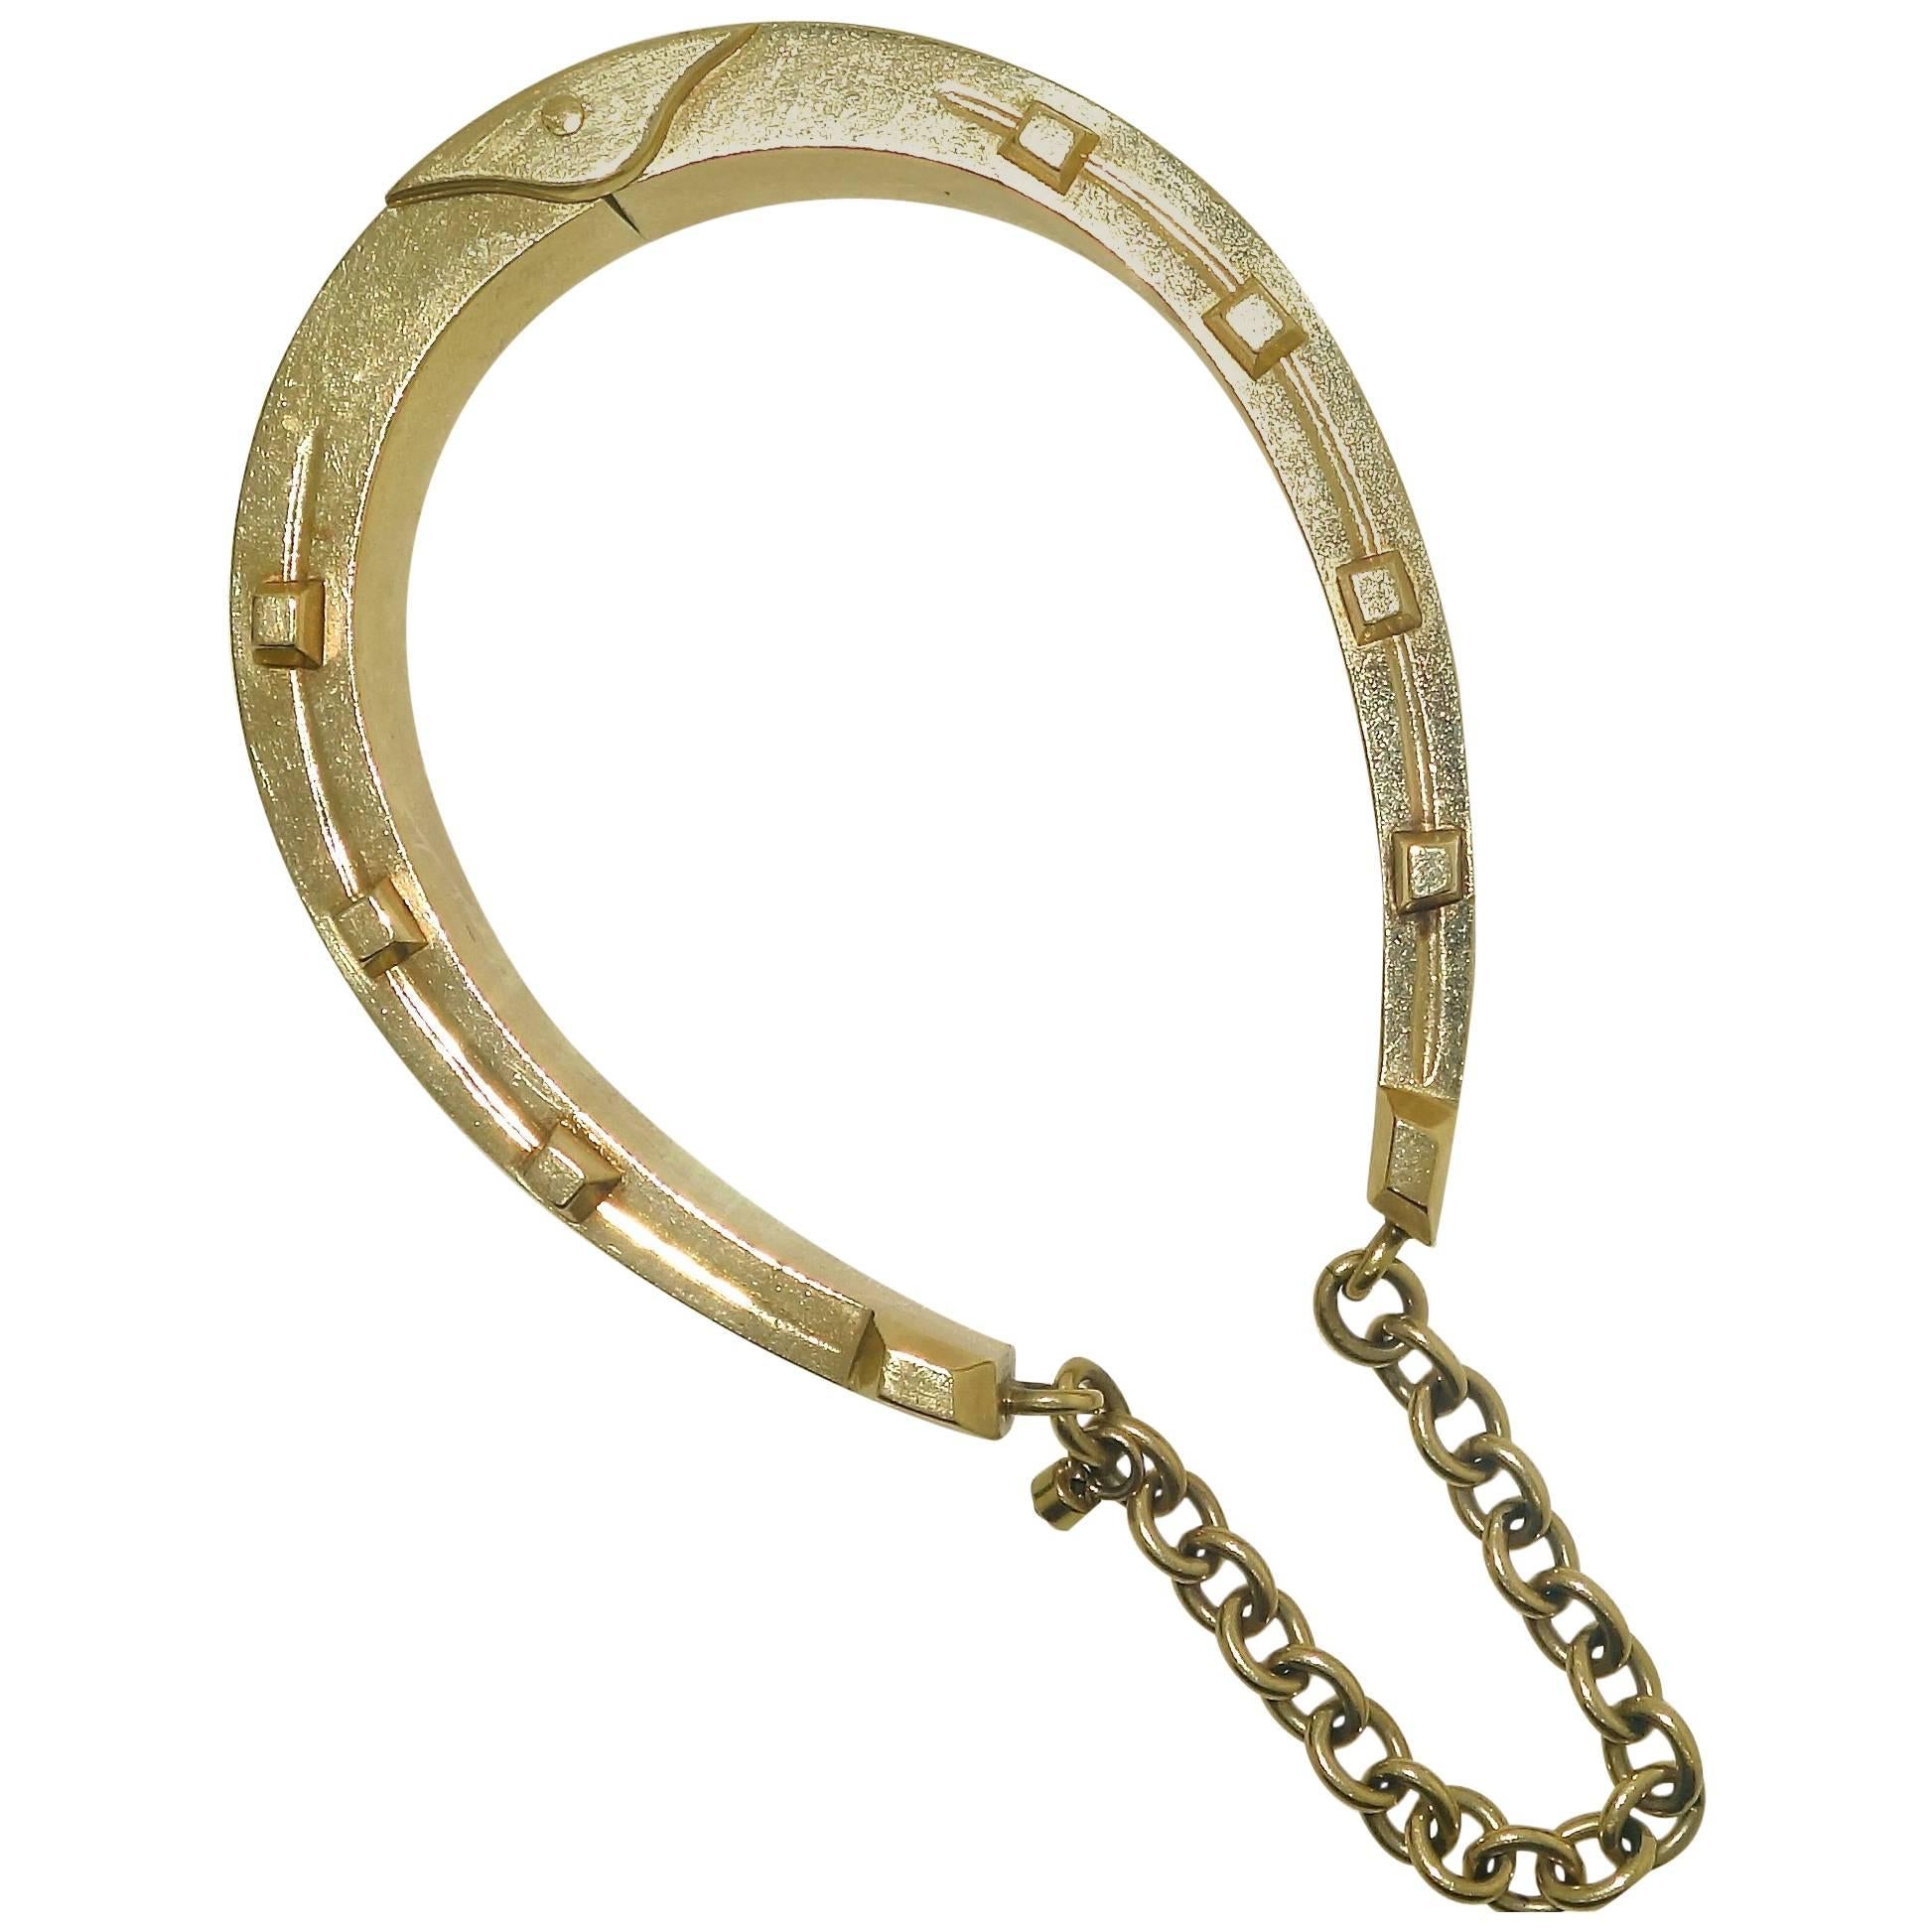 Unusual in design, this gold bangle bracelet opens up wide so that the wrist slips on with ease.  It is an unusual sporting motif design of a classic horse shoe.  A similar  bangle bracelet can be seen in the book, Nineteenth Century Jewelry by